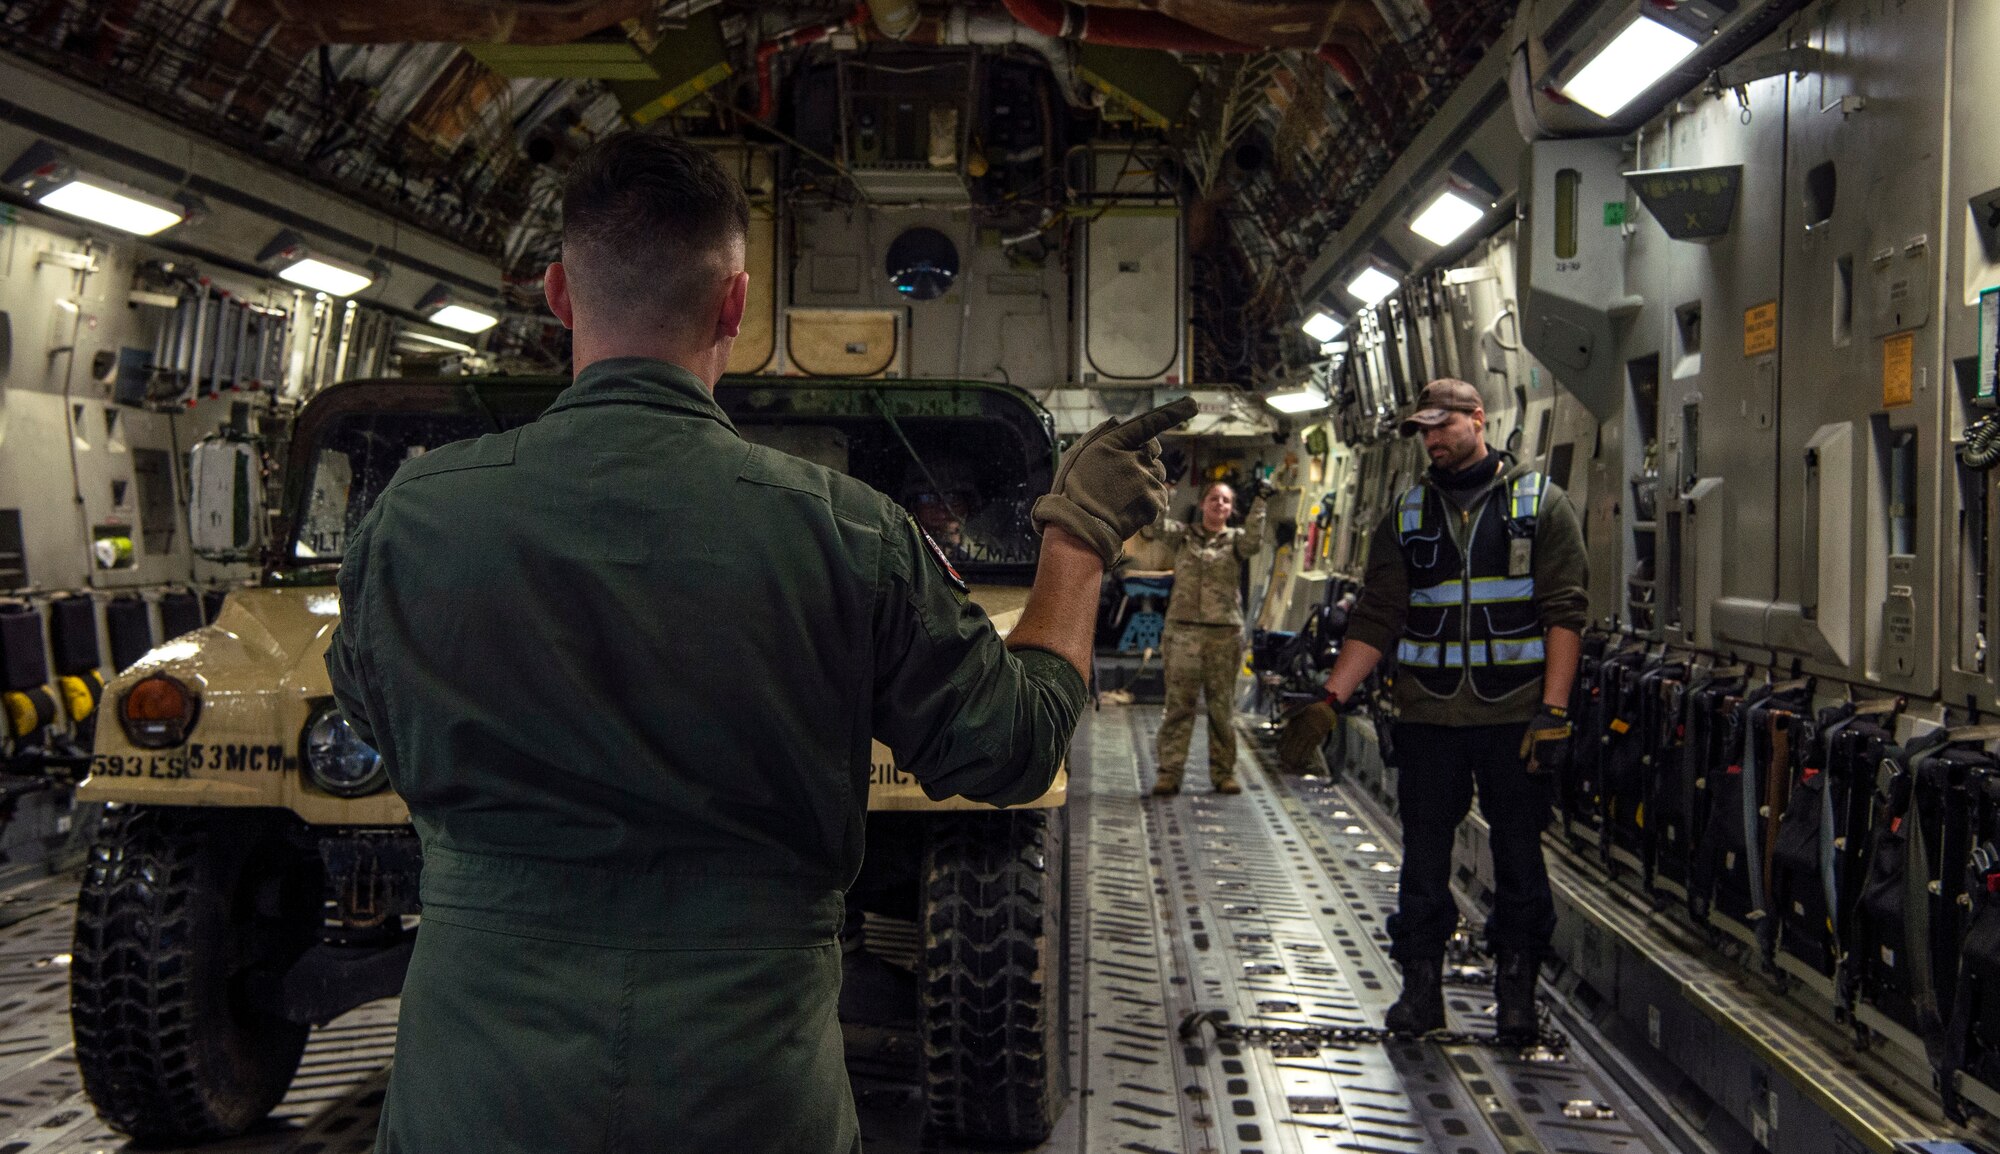 U.S. Air Force Senior Airman Peter Siviglia, 4th Airlift Squadron loadmaster, marshals a U.S. Army HUMVEE onto a C-17 Globemaster III during Exercise Rainier War 21B at Joint Base Lewis-McChord, Washington, Nov. 3, 2021. Rainier War is a semi-annual, large readiness exercise led by 62nd Airlift Wing, designed to train aircrews under realistic scenarios that support a full spectrum readiness operations against modern threats and replicate today’s contingency operations. (U.S. Air Force photo by Staff Sgt. Tryphena Mayhugh)